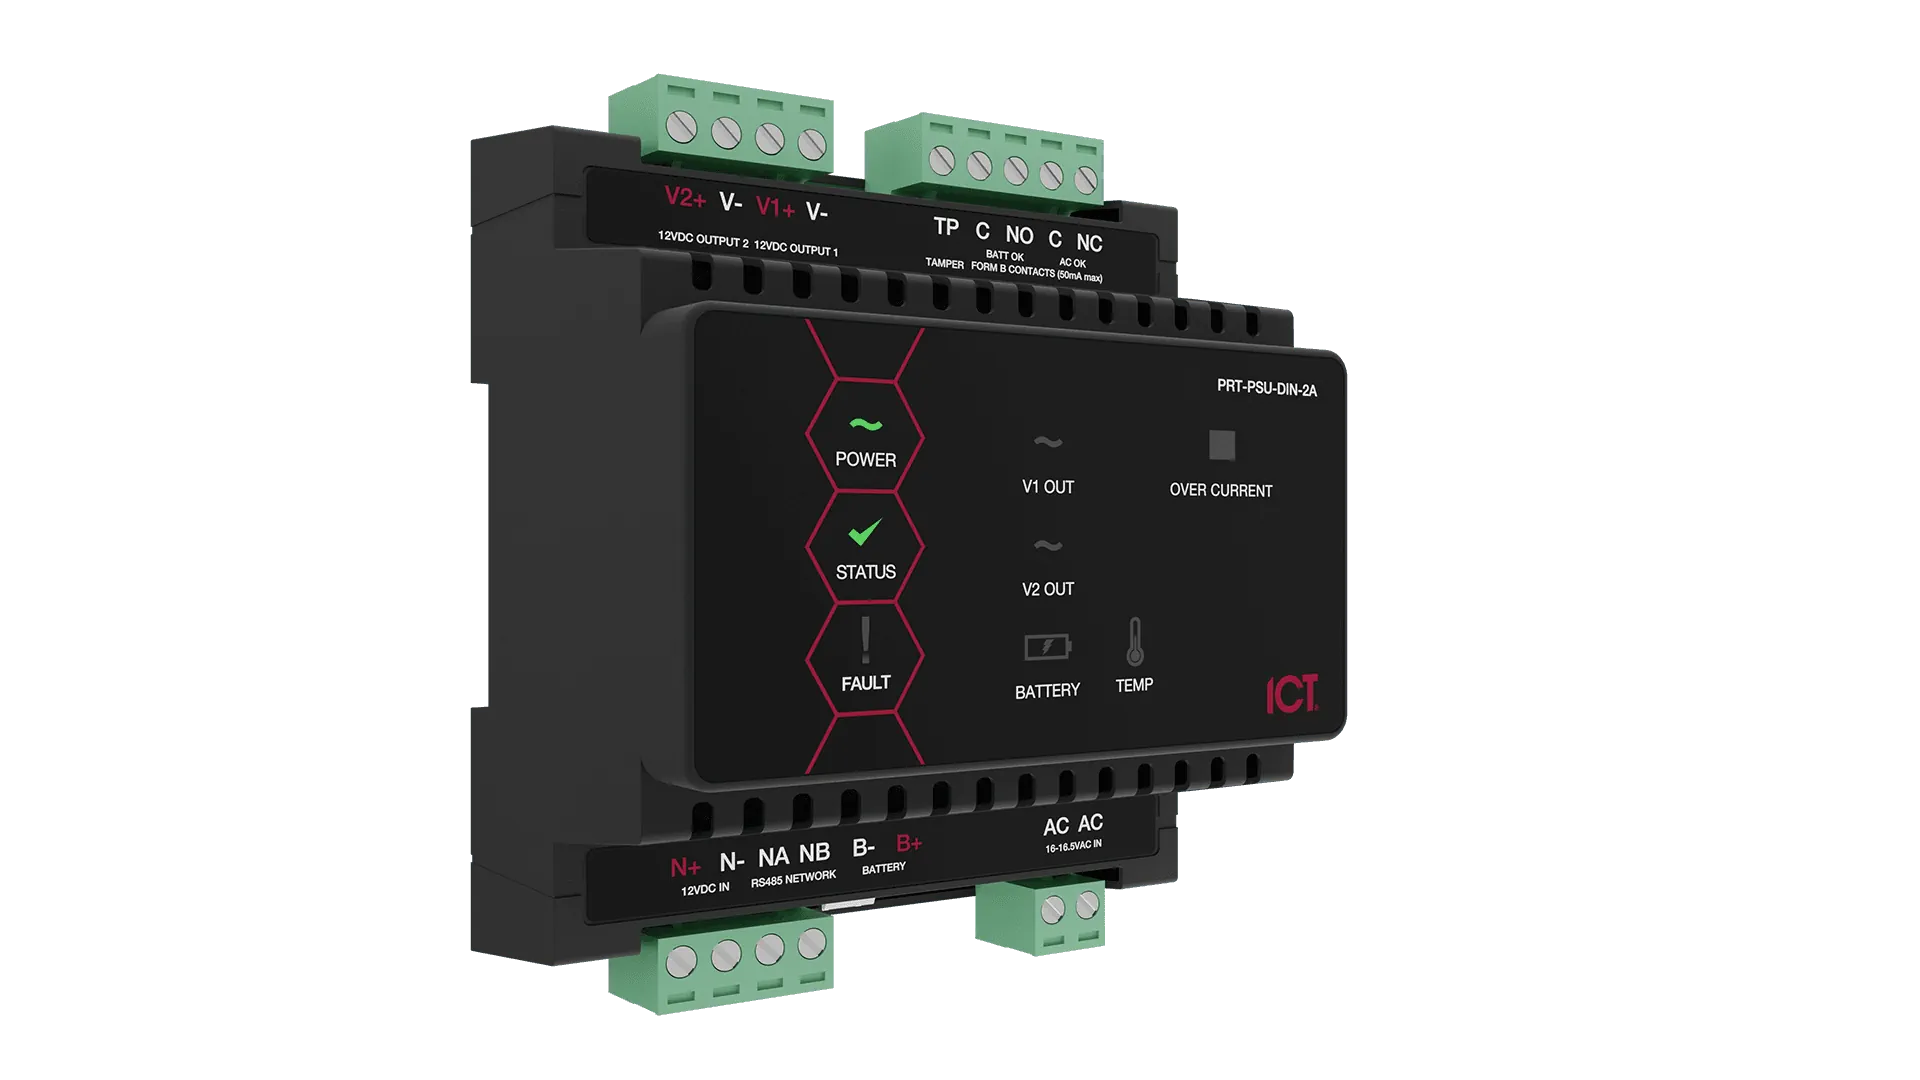 Protege DIN Rail 2A Intelligent Power Supply | ICT